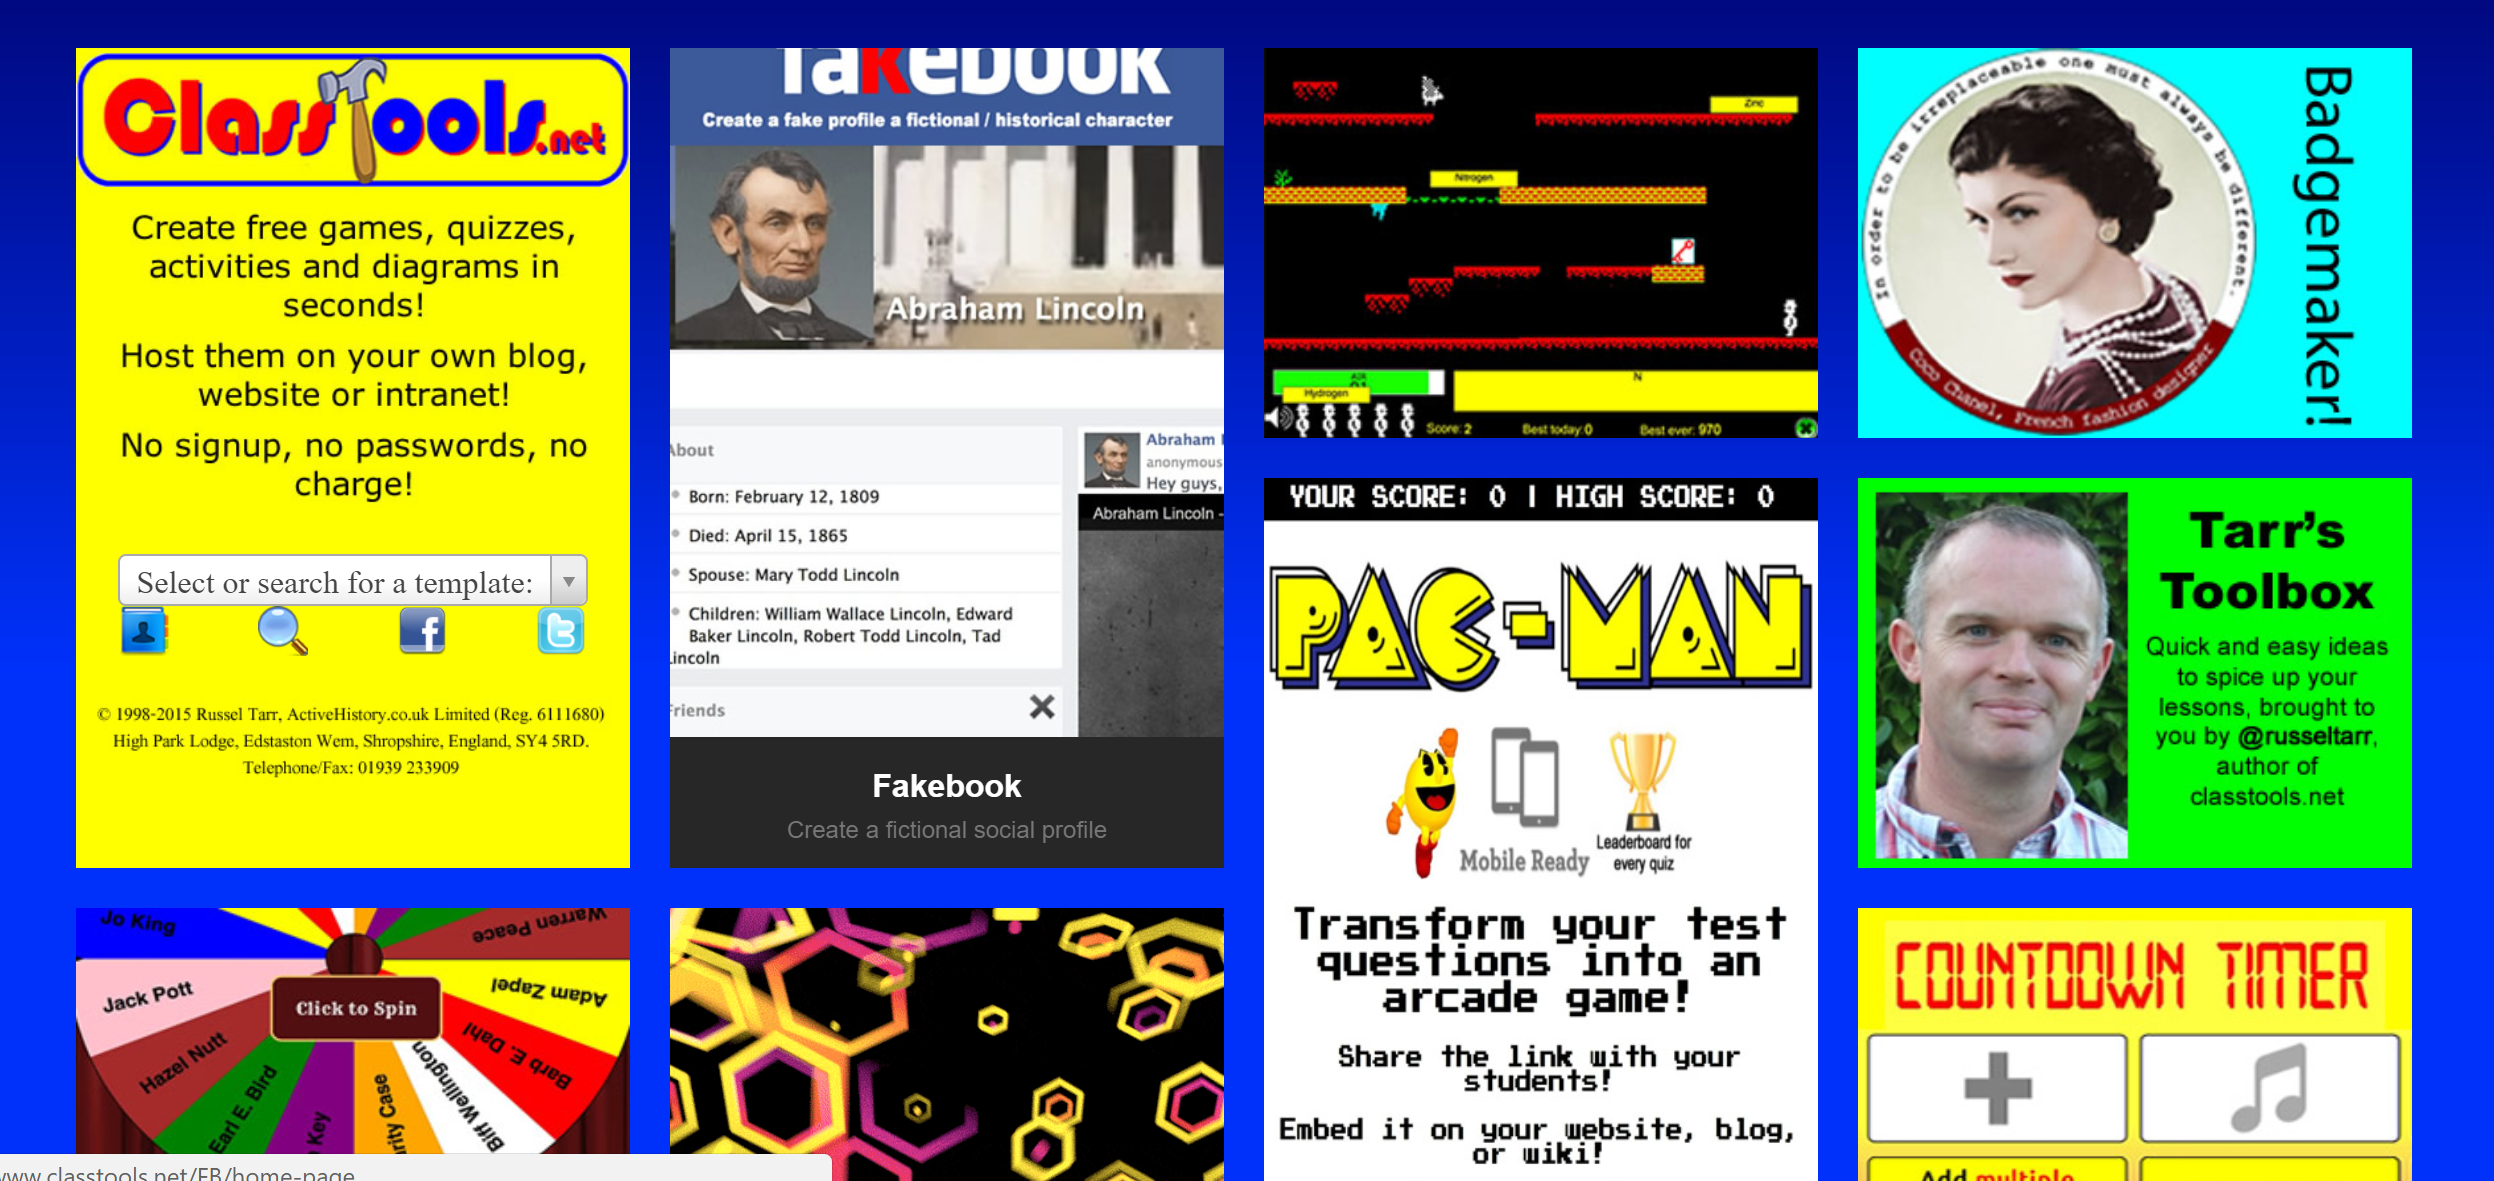 Try ClassTools for Making Educational Games